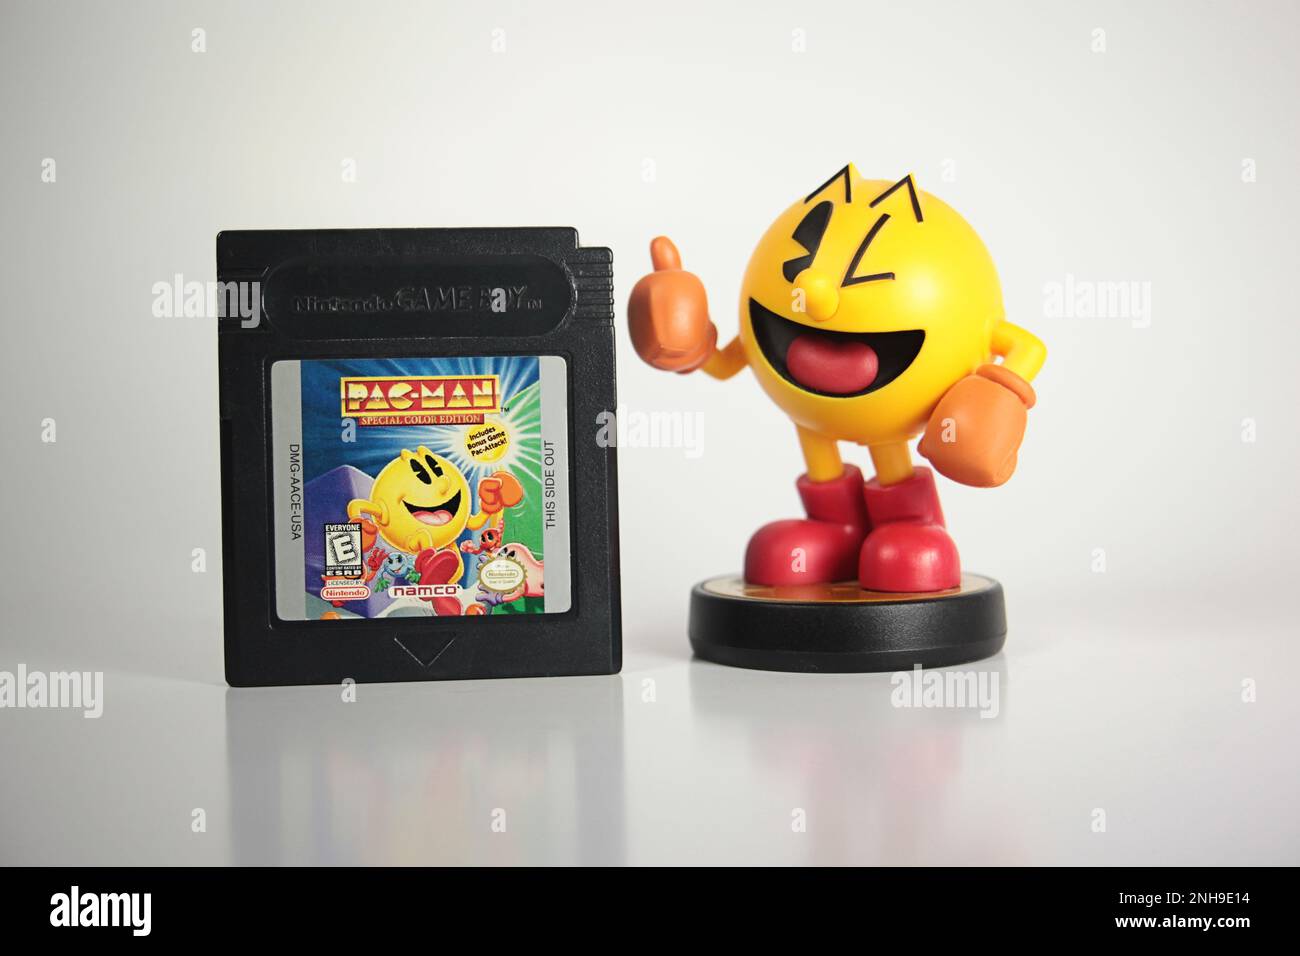 New York, NY - October 10, 2021: Namco Pac-man video game merchandise. Classic Nintendo Gameboy cartridge with Amiibo Switch figure Stock Photo